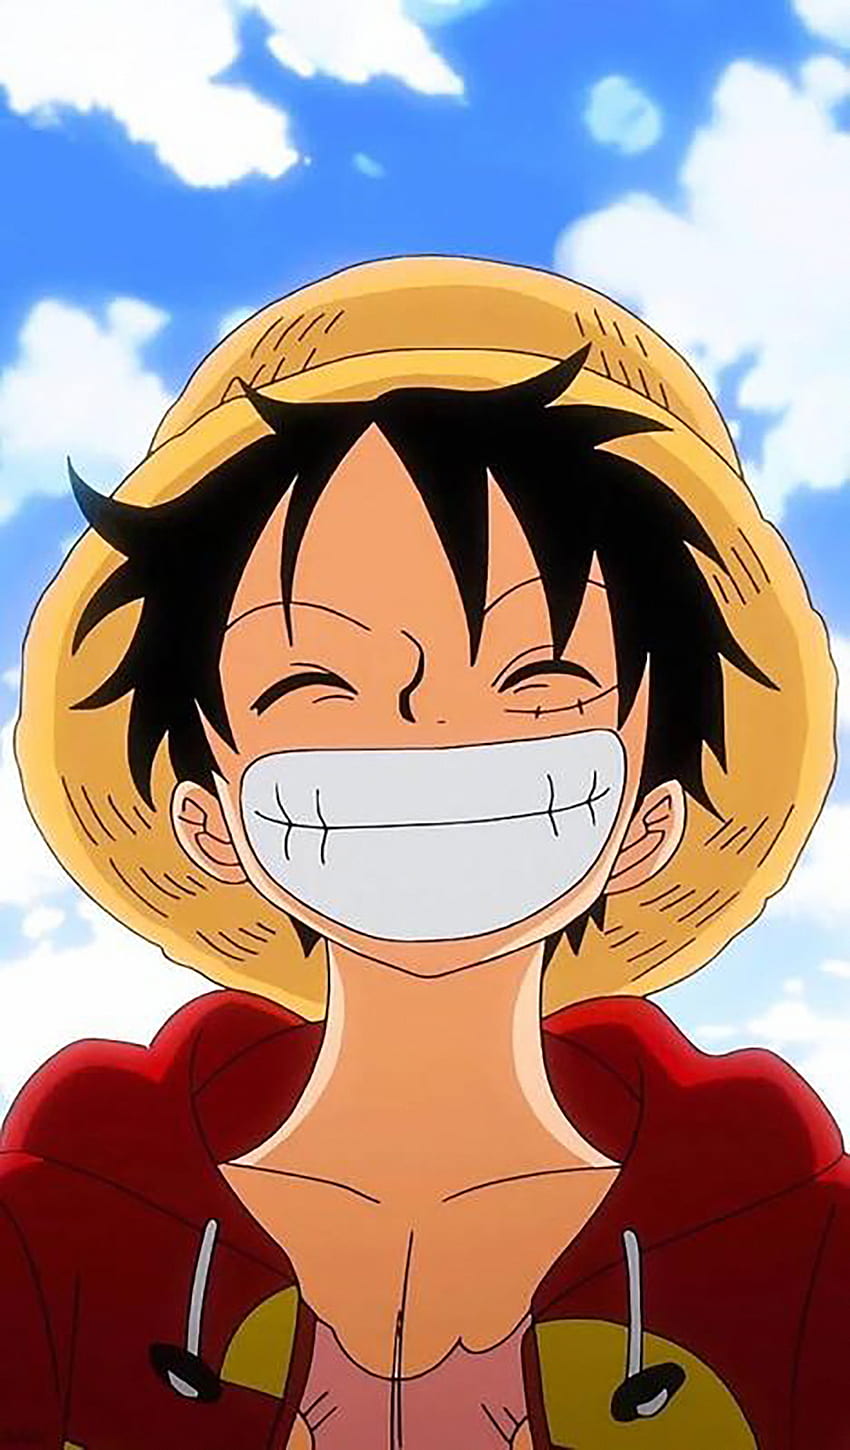 Masque 'Luffy Swimming - One Piece' par Lilzer99 in 2020. Anime , Anime, One piece manga, Luffy Smile HD電話の壁紙